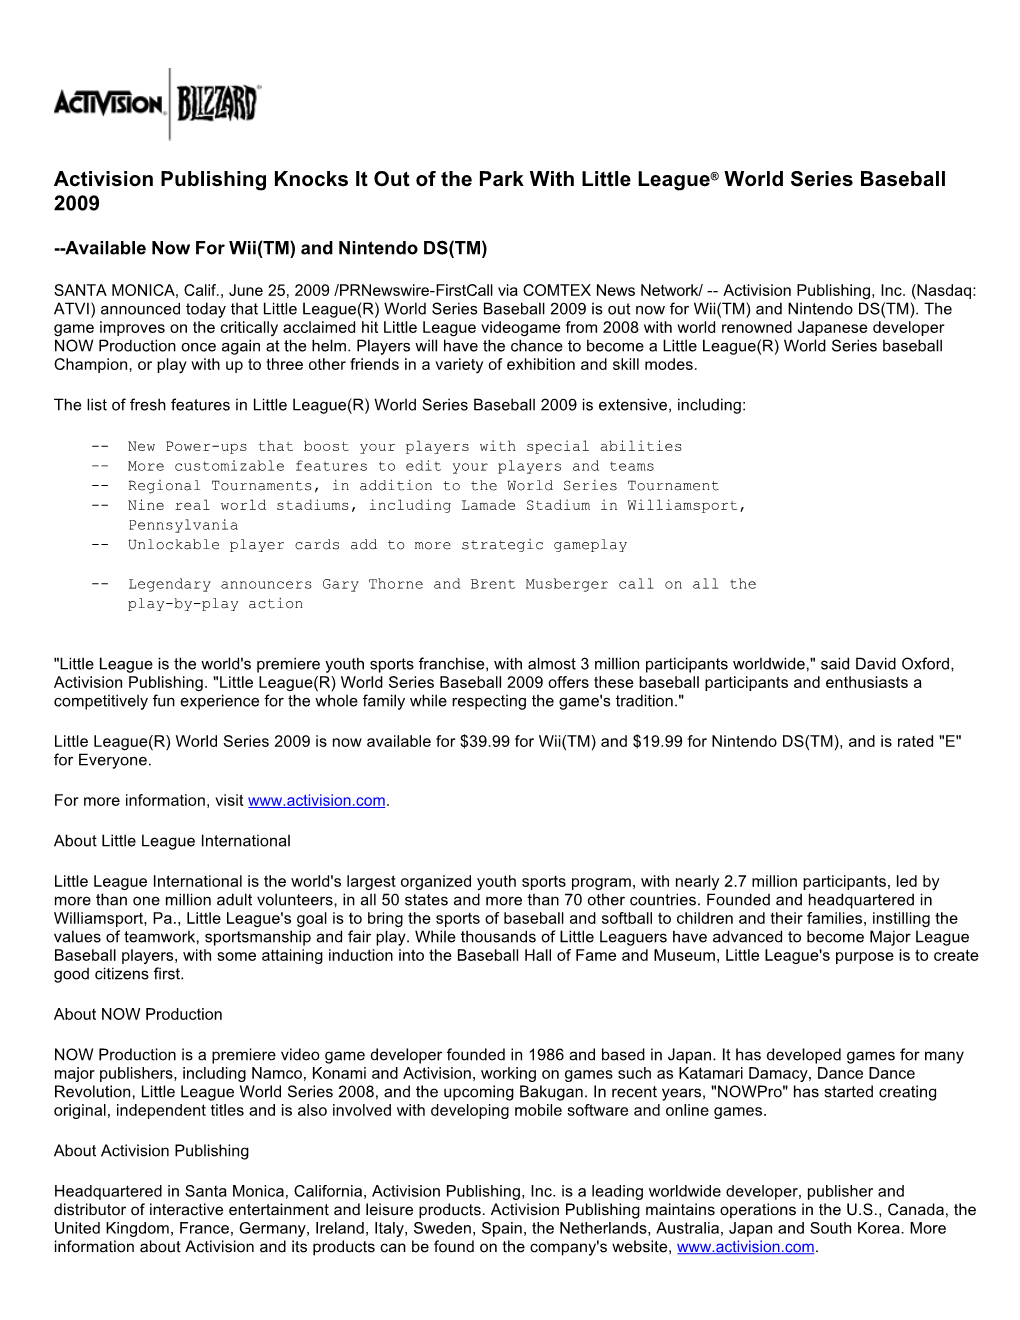 Activision Publishing Knocks It out of the Park with Little League® World Series Baseball 2009